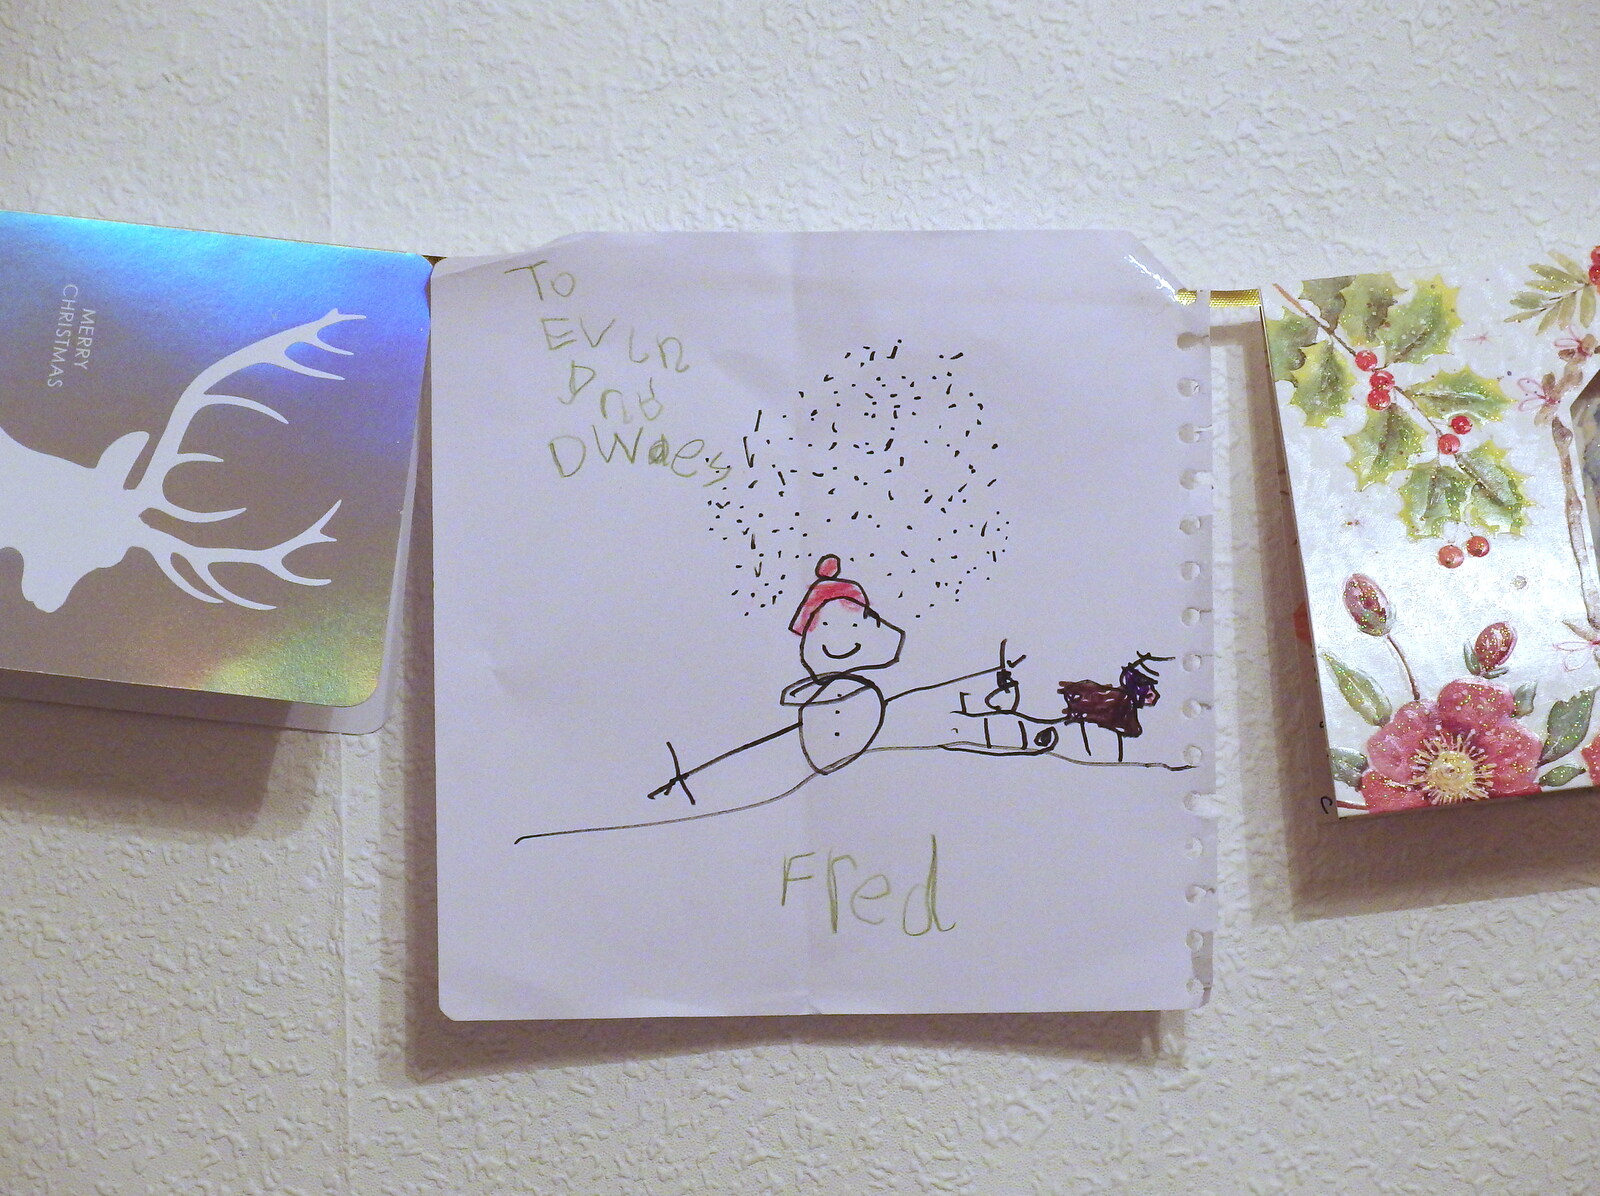 Fred's home-made Christmas card from A Trip to Monkstown Farm and Blackrock, County Dublin, Ireland - 2nd January 2014